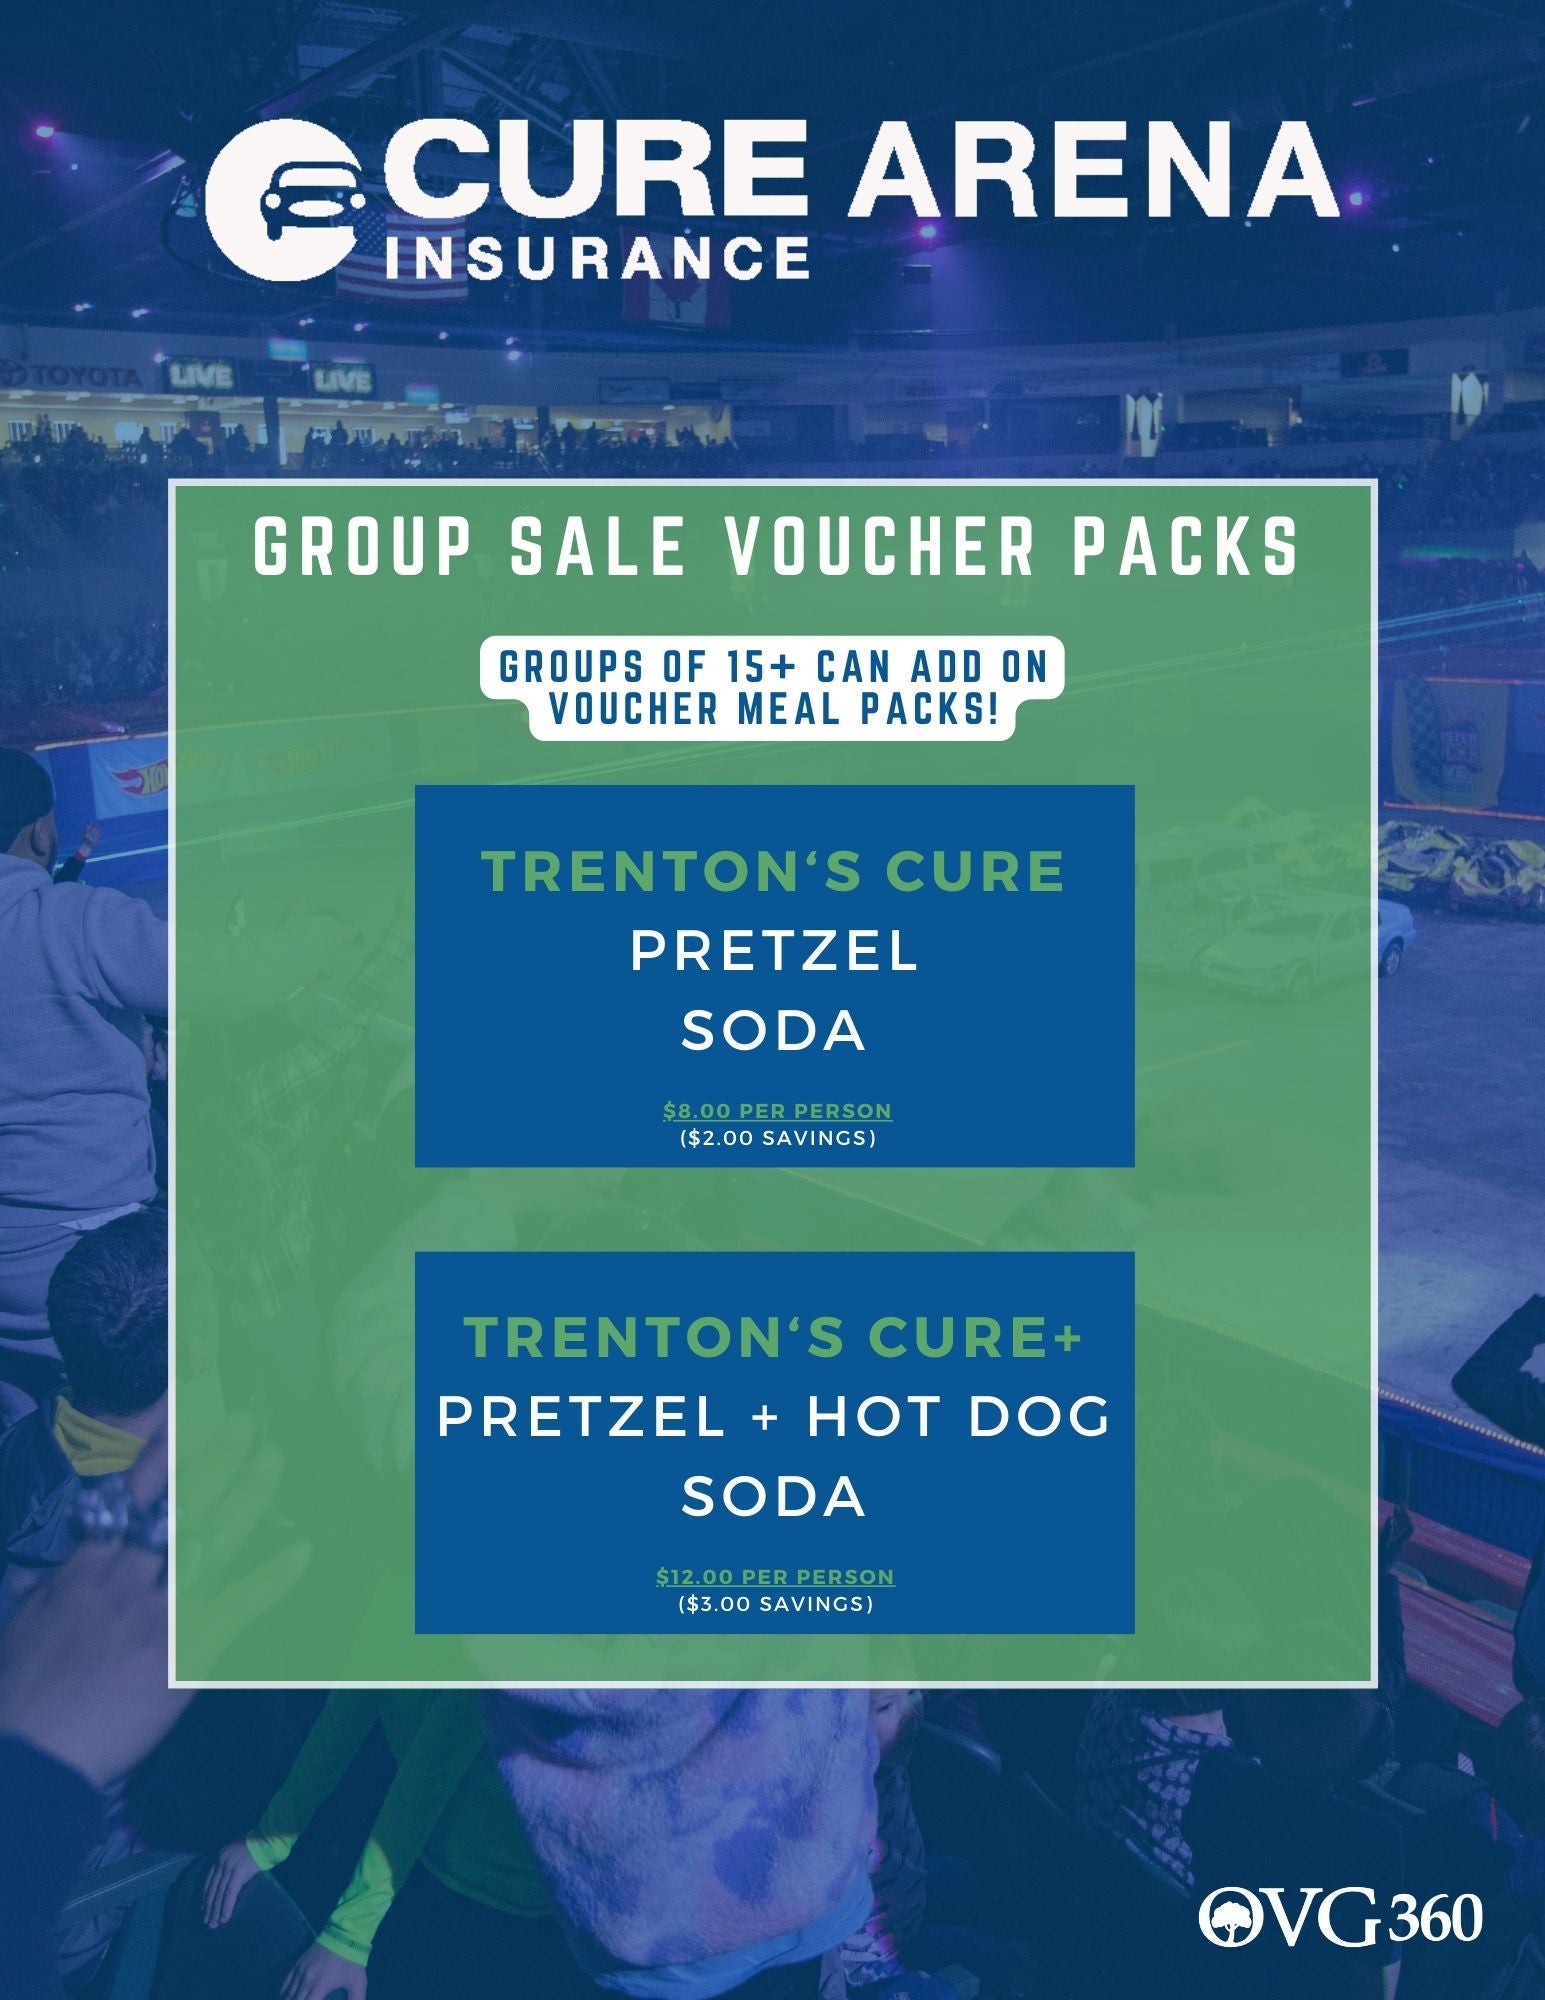 F&B Group Voucher Group Packages.jpg